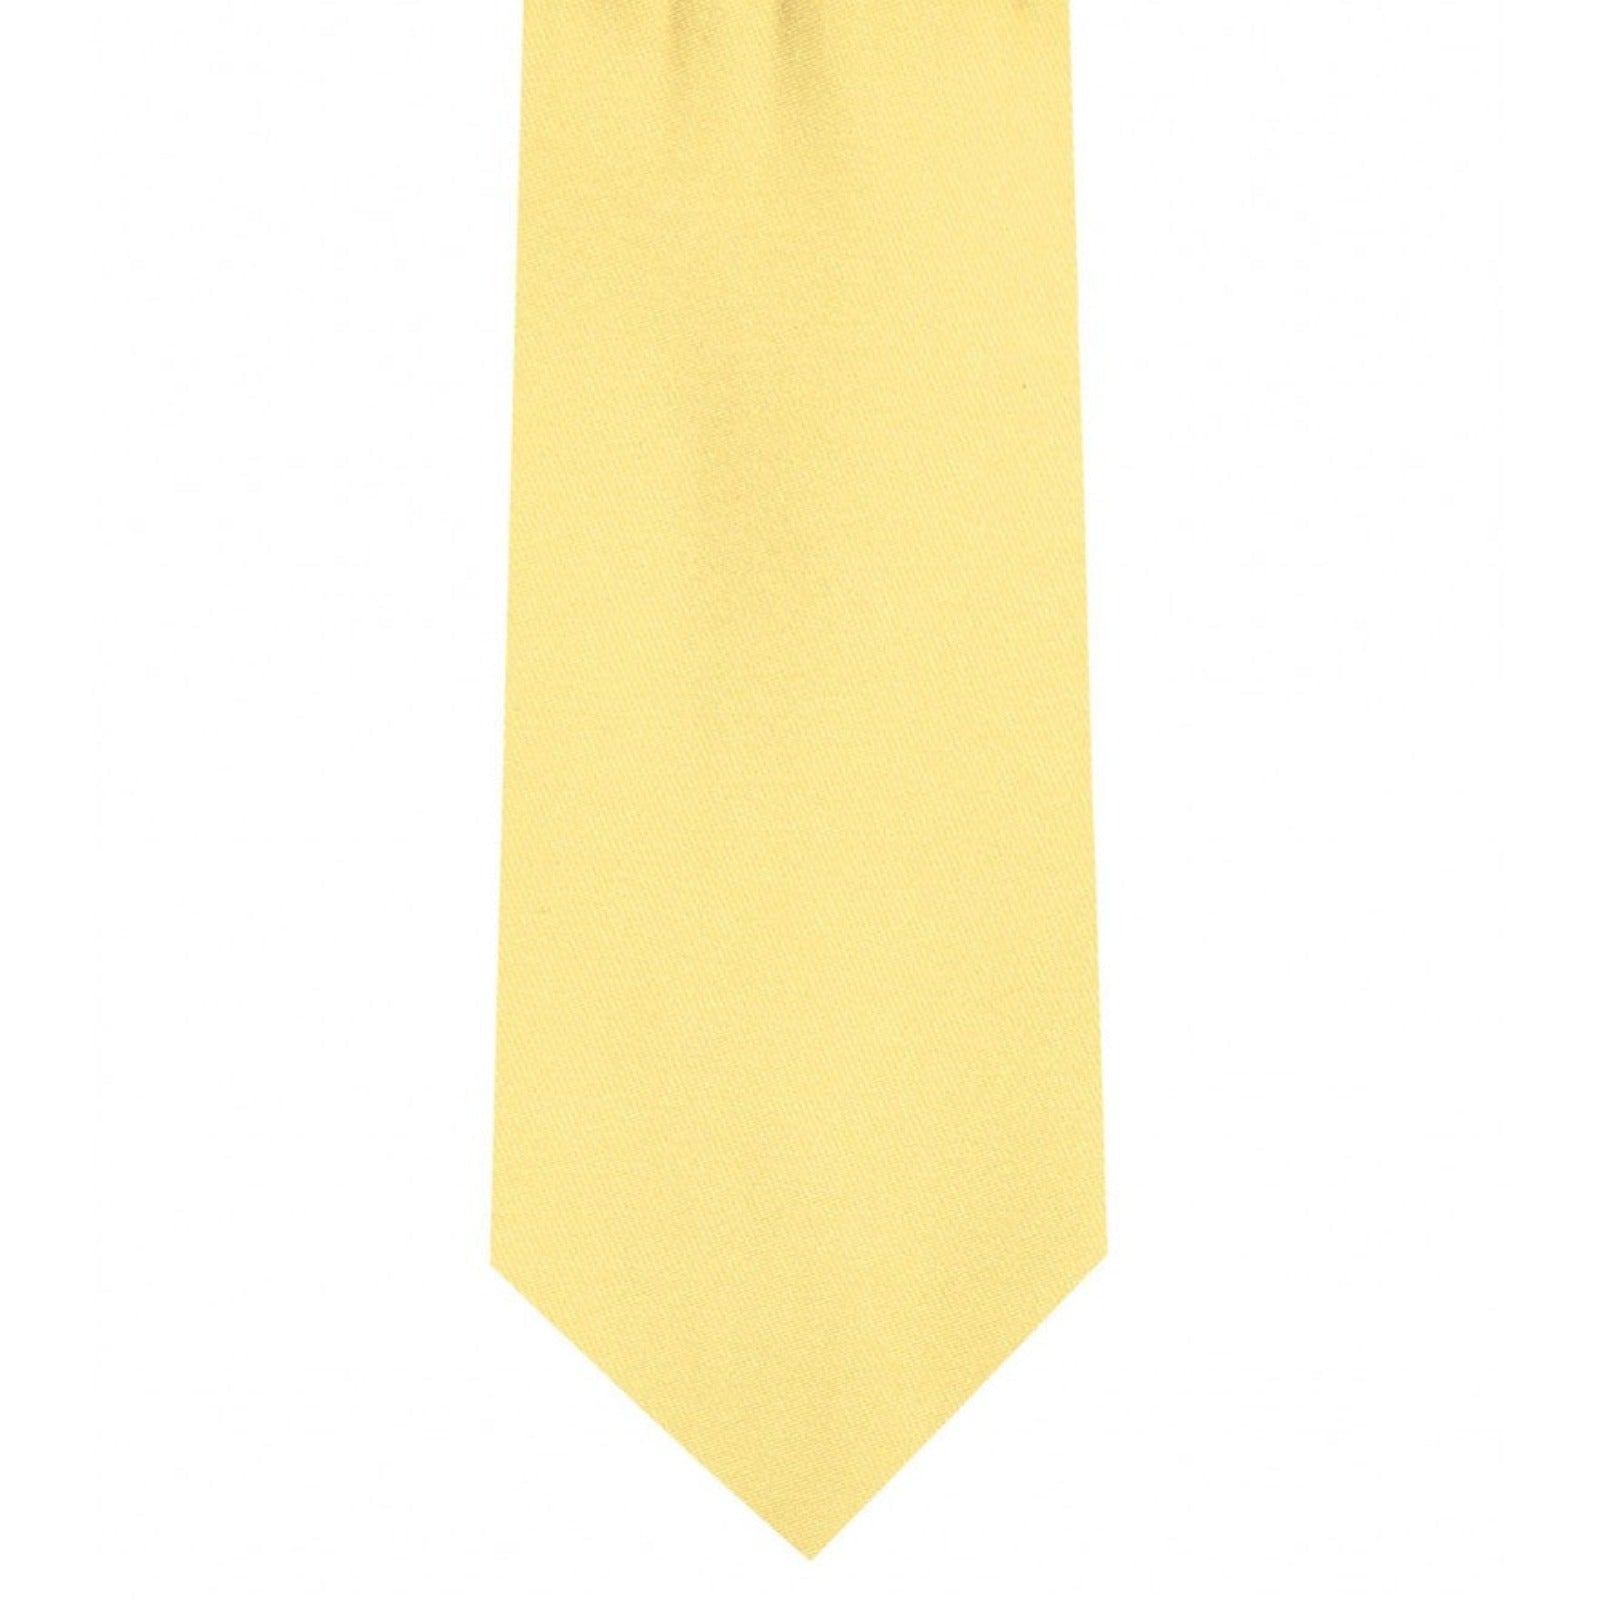 Classic Banana Yellow Tie Ultra Skinny tie width 2.25 inches With Matching Pocket Square | KCT Menswear